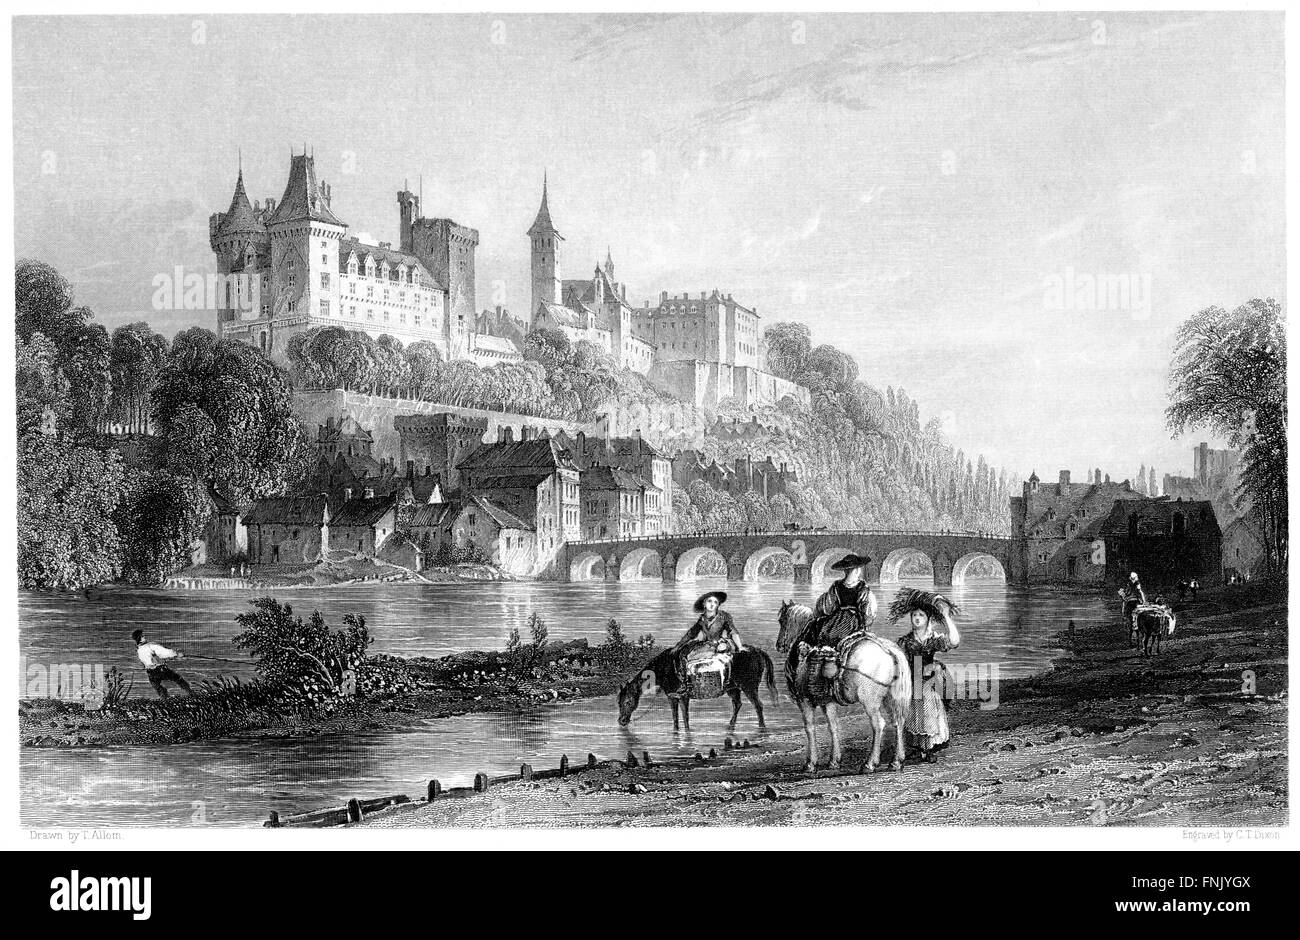 An engraving of the Chateau and Bridge of Pau scanned at high resolution from a book printed in 1876. Believed copyright free. Stock Photo